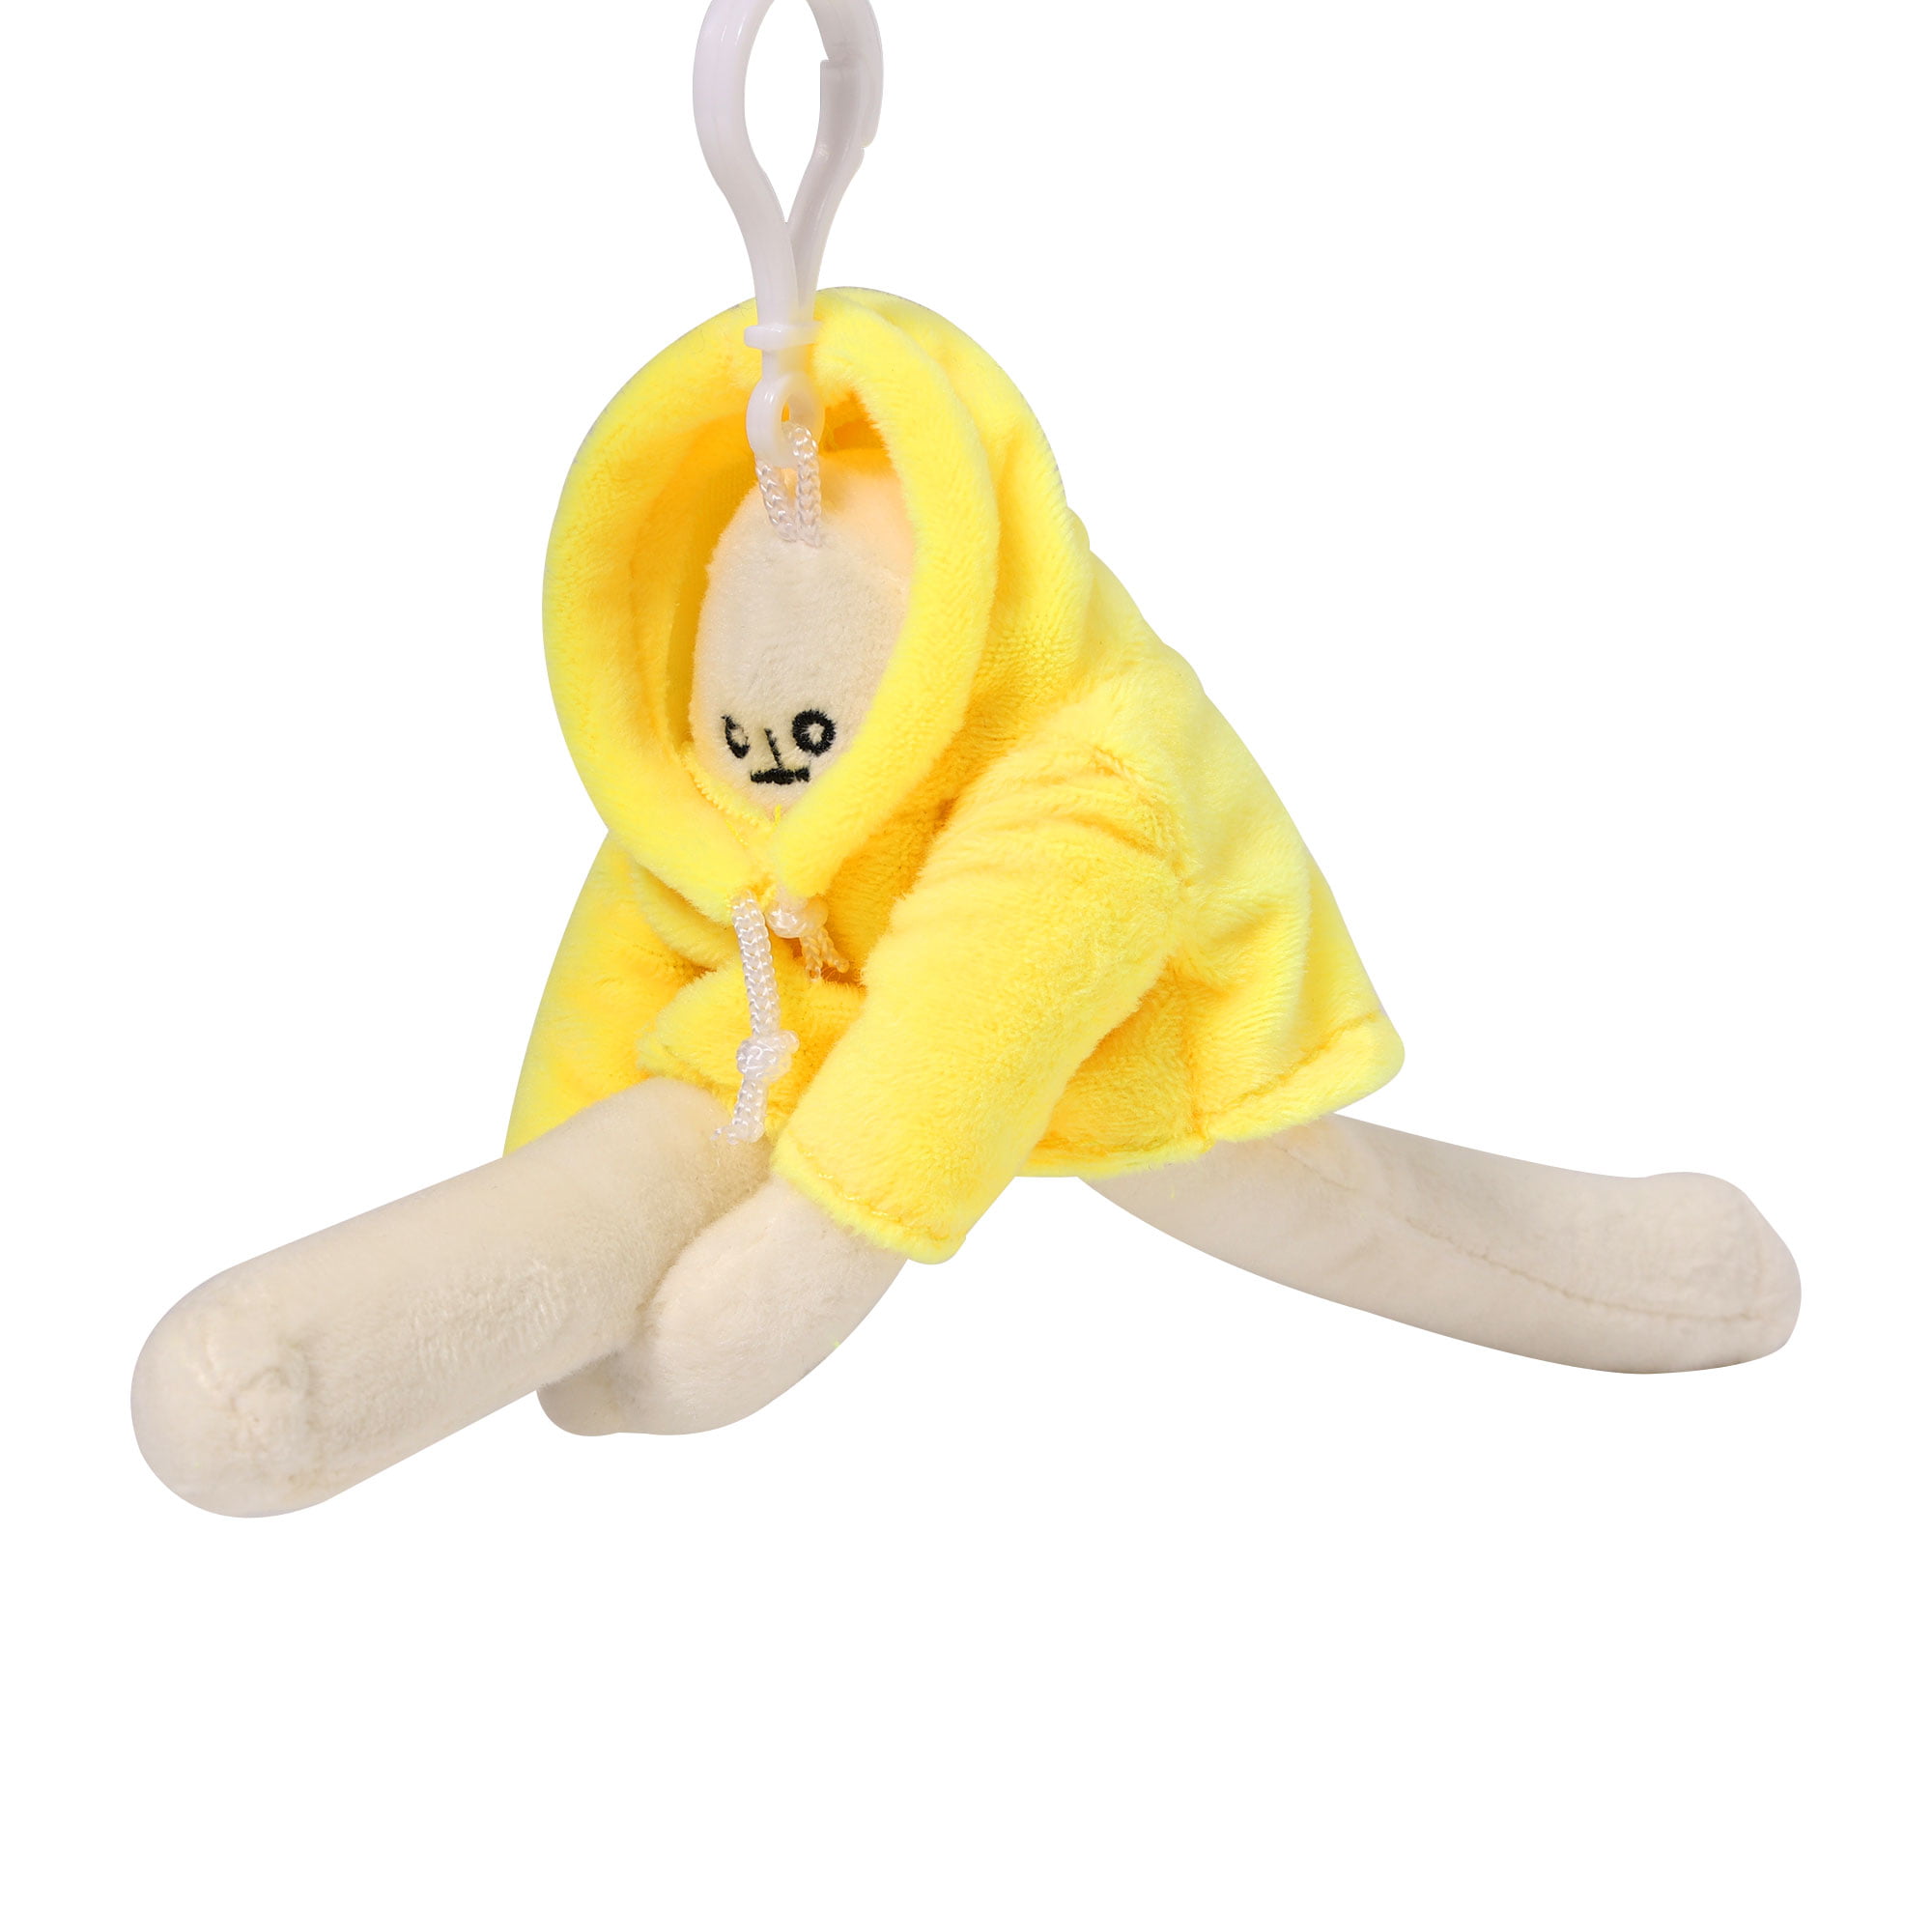 MGFAION 16 Inch Banana Doll Plush Stuffed Man Toy with Magnet, Funny  Changeable Pillow Stress Release Hugs Toys Christmas Birthday Gifts for  Kids Boys